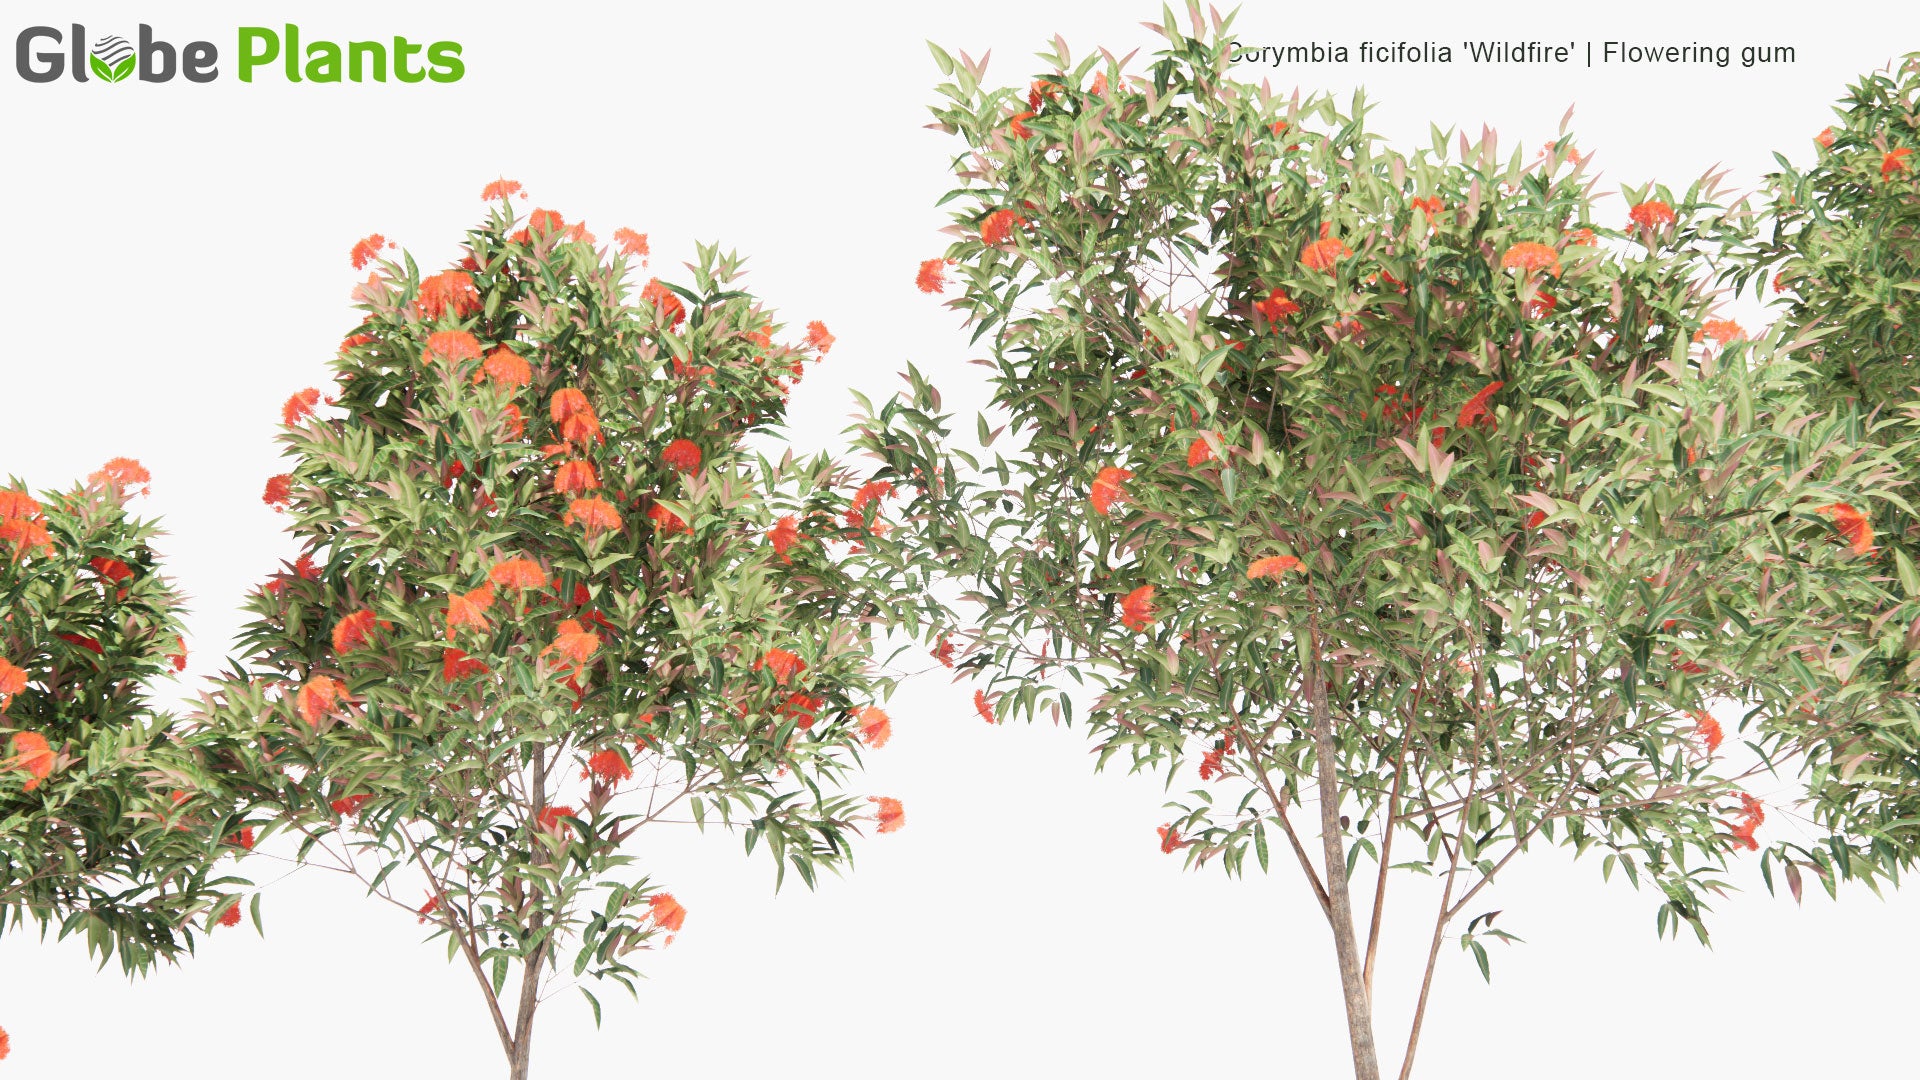 Low Poly Corymbia Ficifolia 'Wildfire' - Flowering Gum (3D Model)